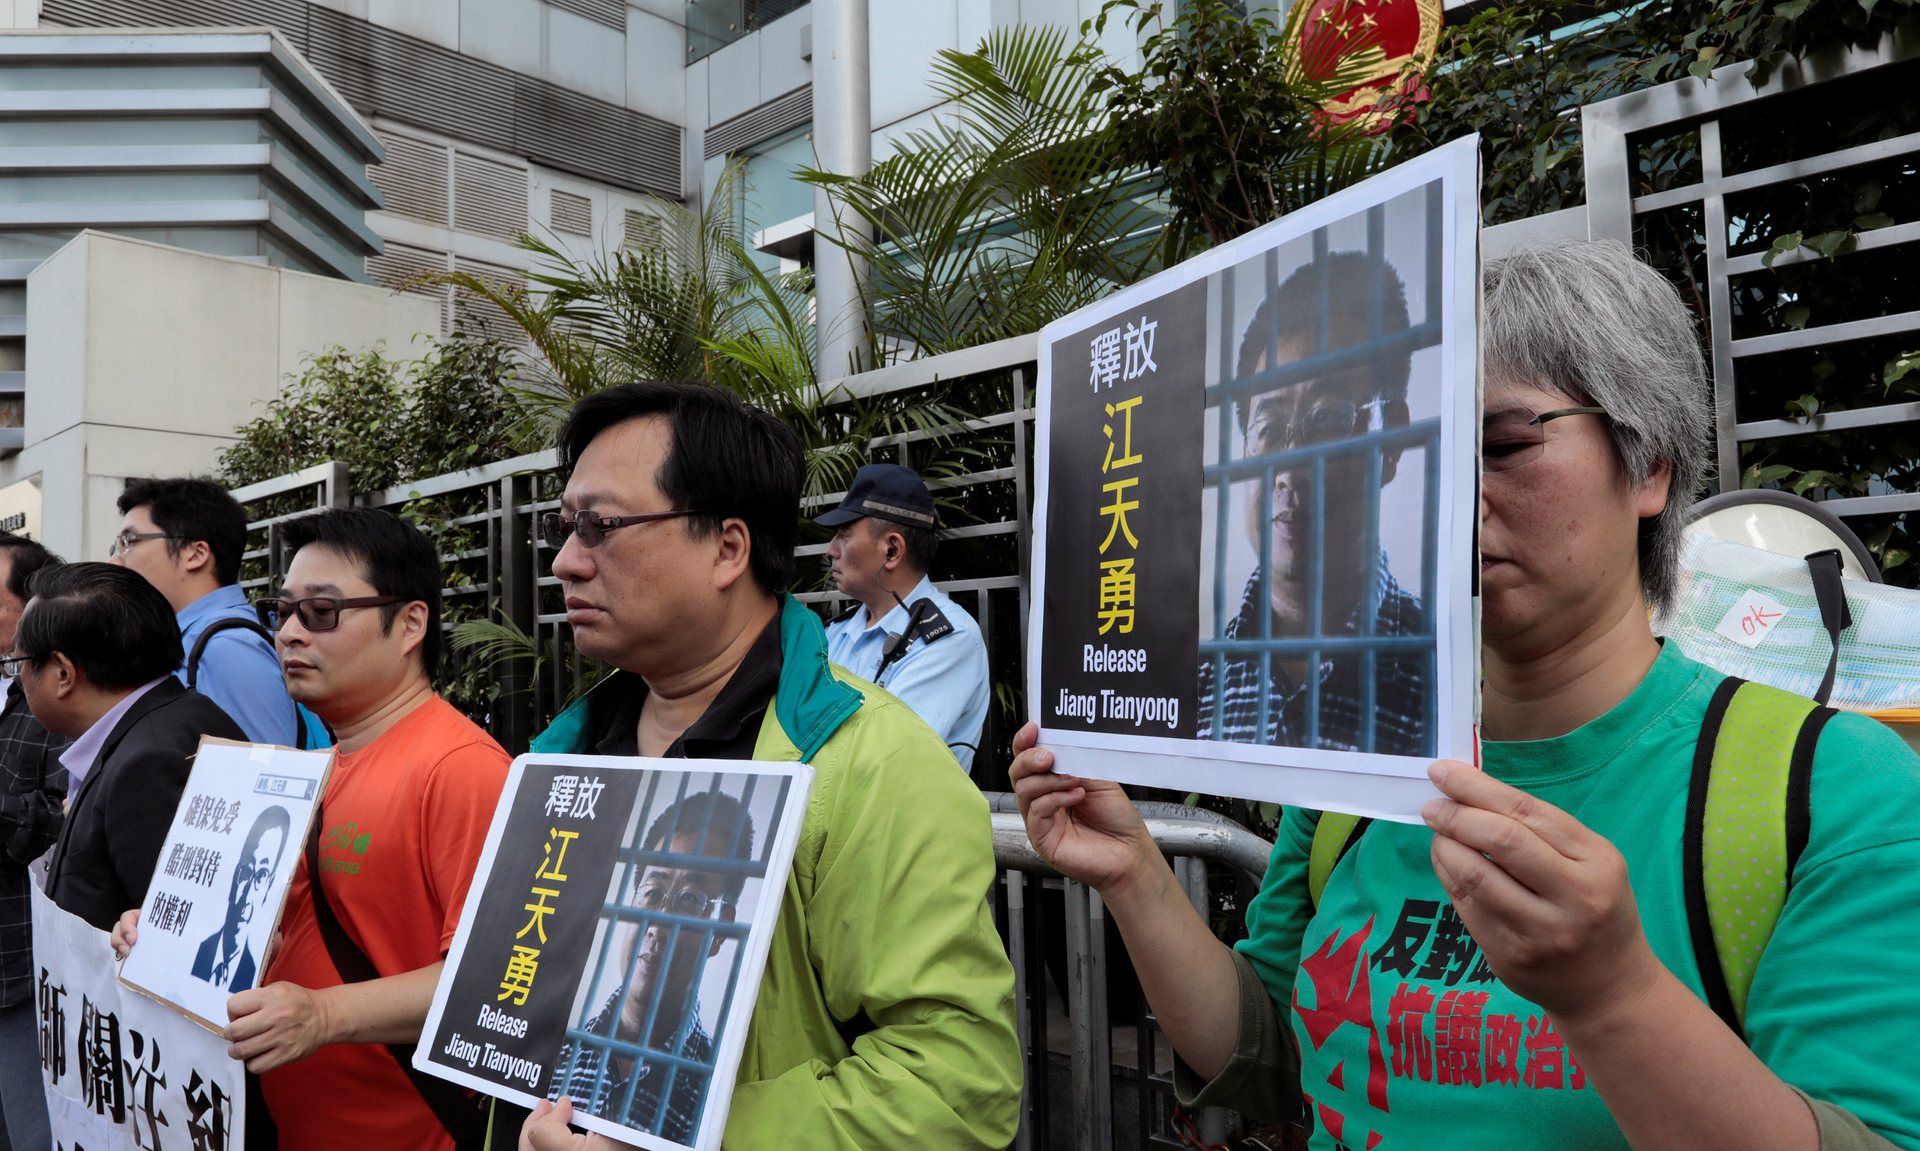 Why Christmas time in China means jail for human rights activists